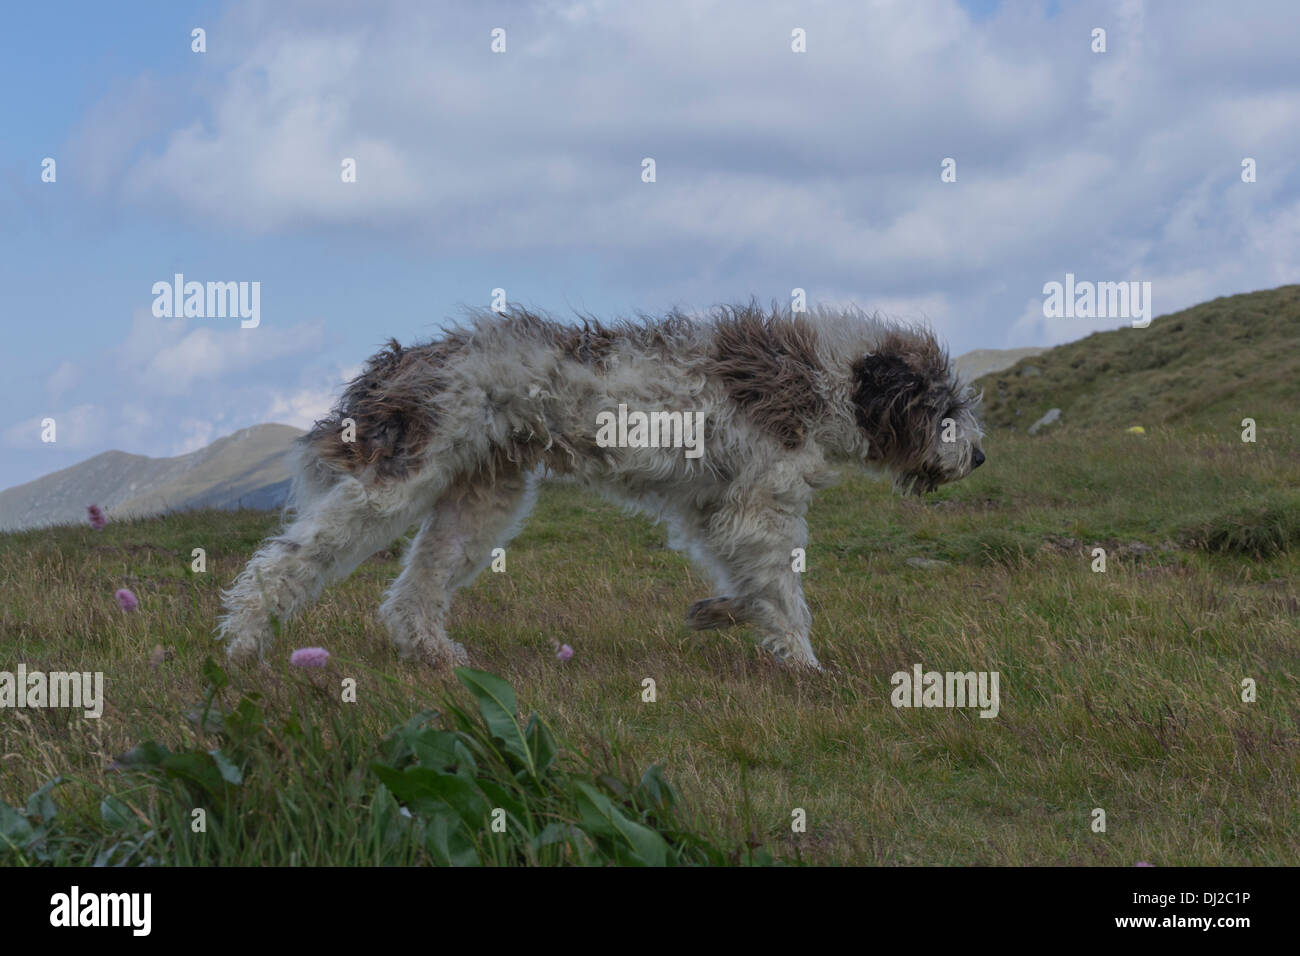 Romanian Shepherd High Resolution Stock Photography And Images Alamy